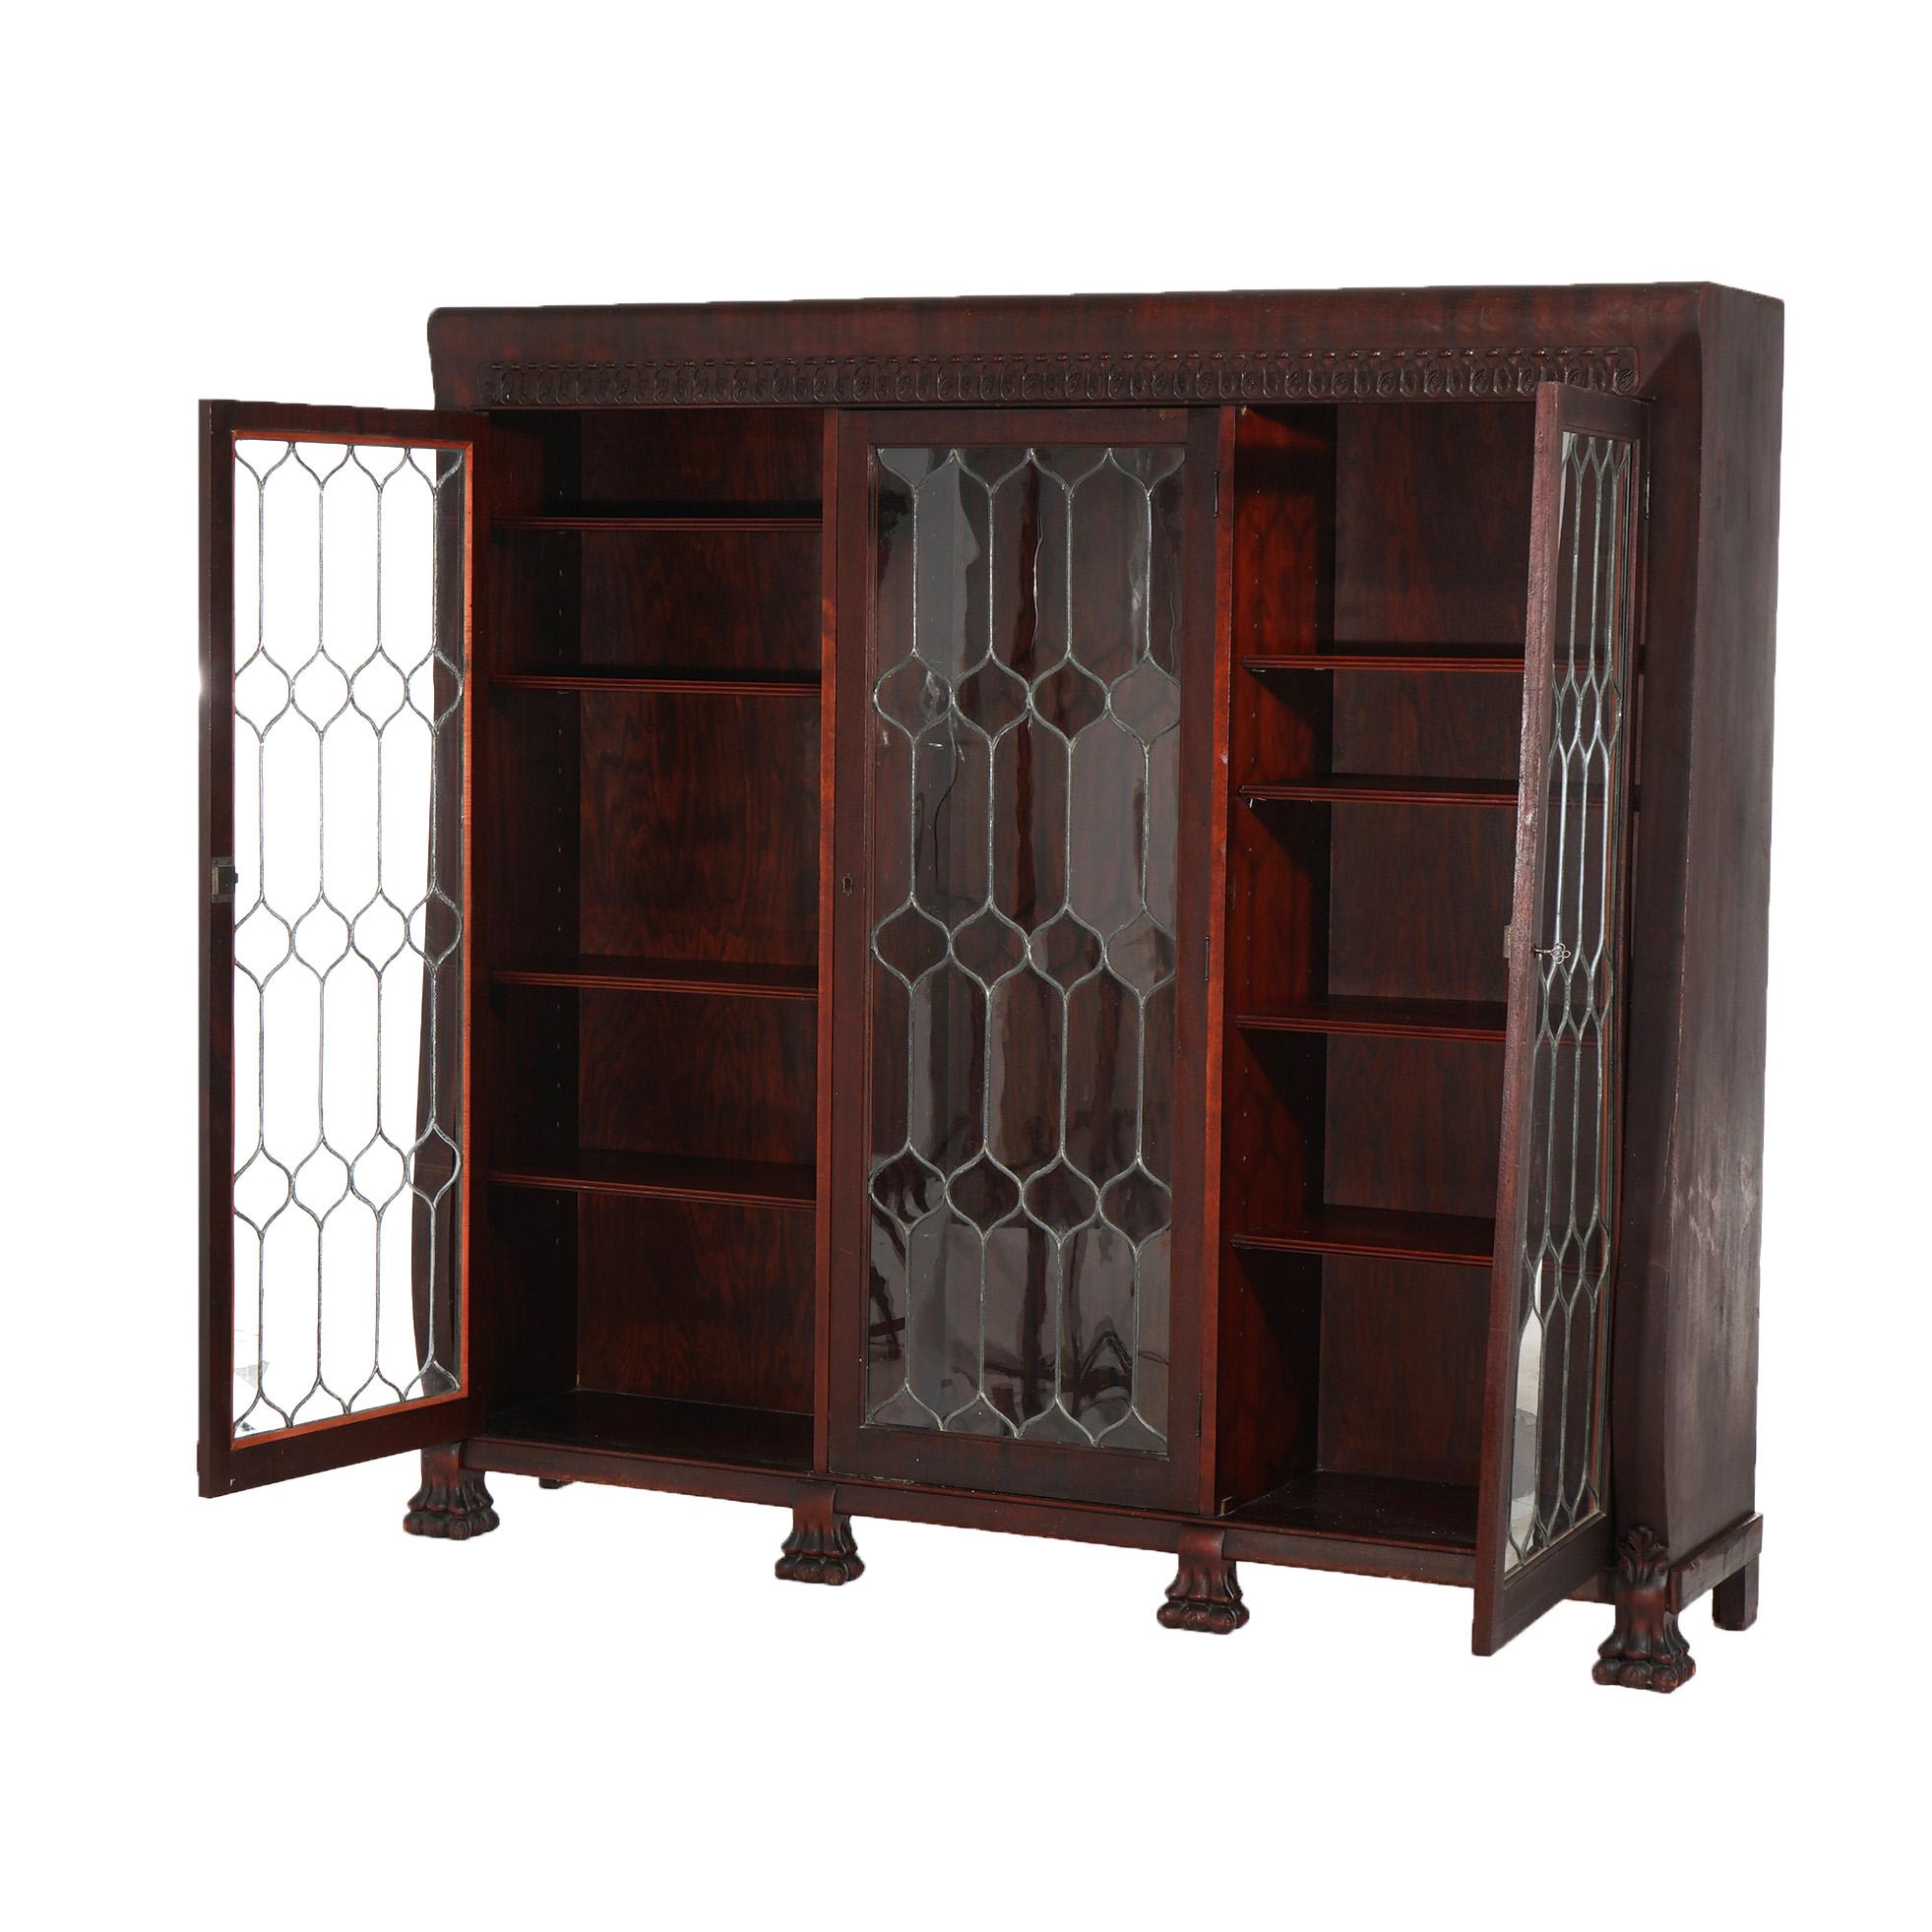 ***Ask About Reduced In-House Shipping Rates - Reliable Service & Fully Insured***
An antique American Empire Classical Greco bookcase offers mahogany cosnt4uction with three leaded glass doors opening to a divided and adjustable shelf interior,